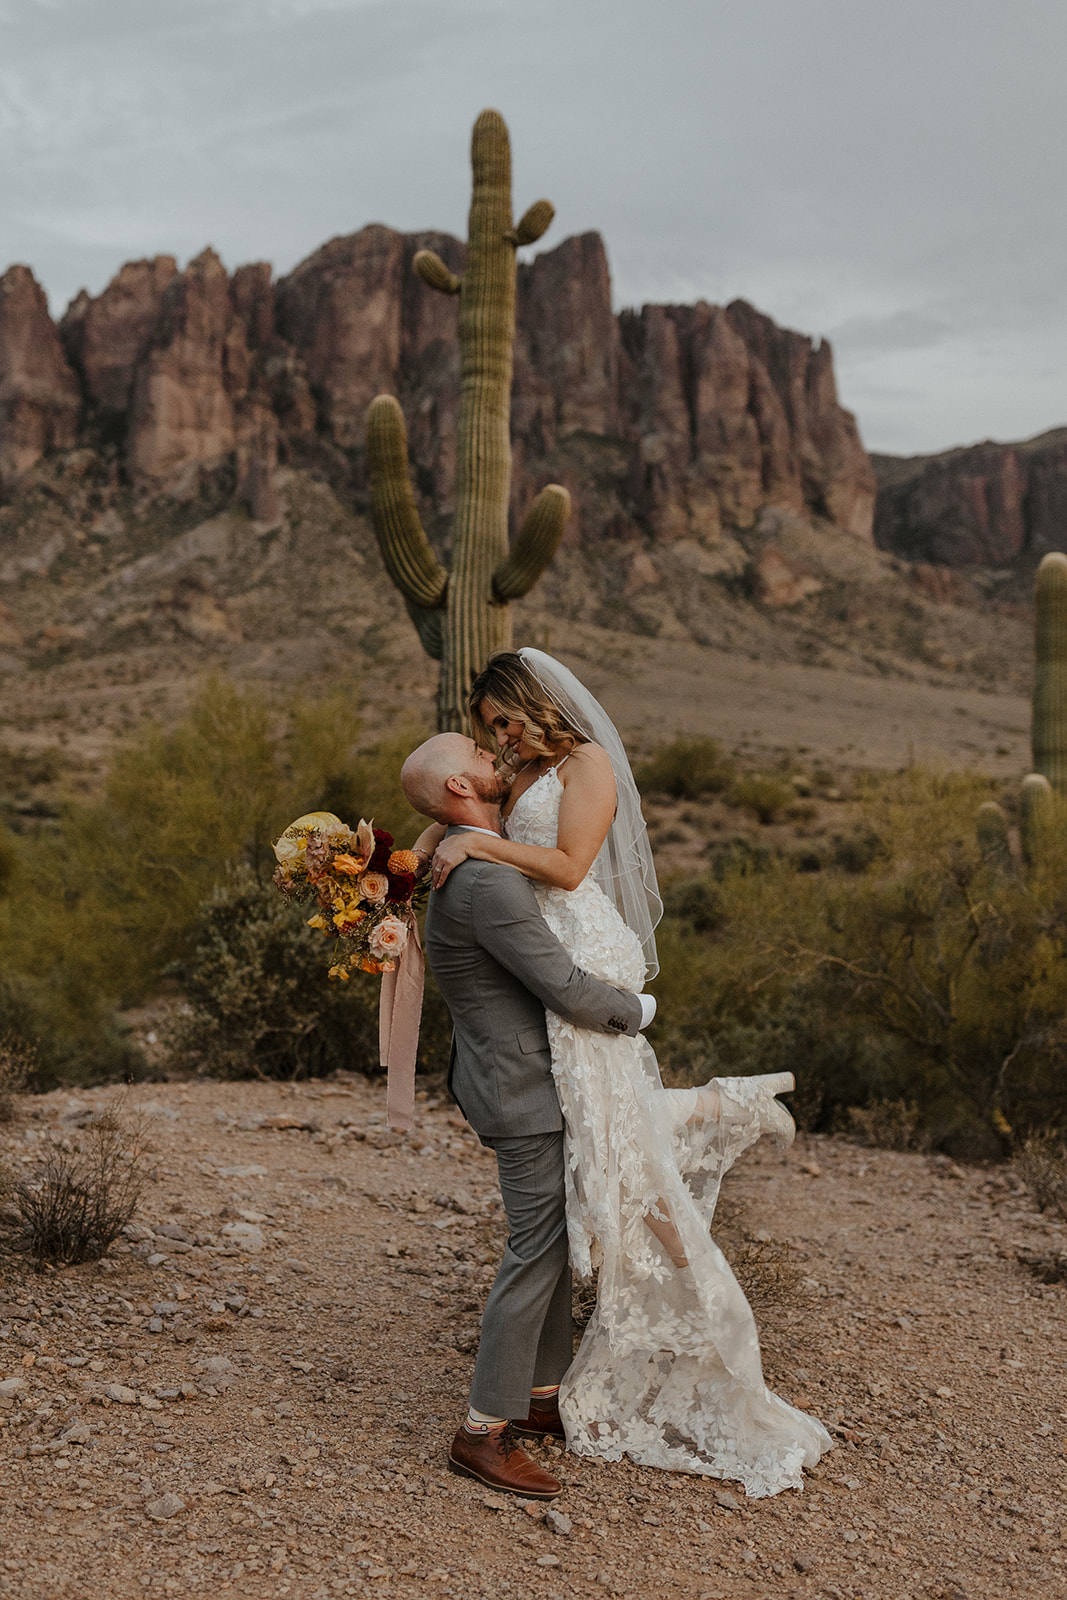 Bride jumps into her new husbands arms as they pose in front a beautiful cactus